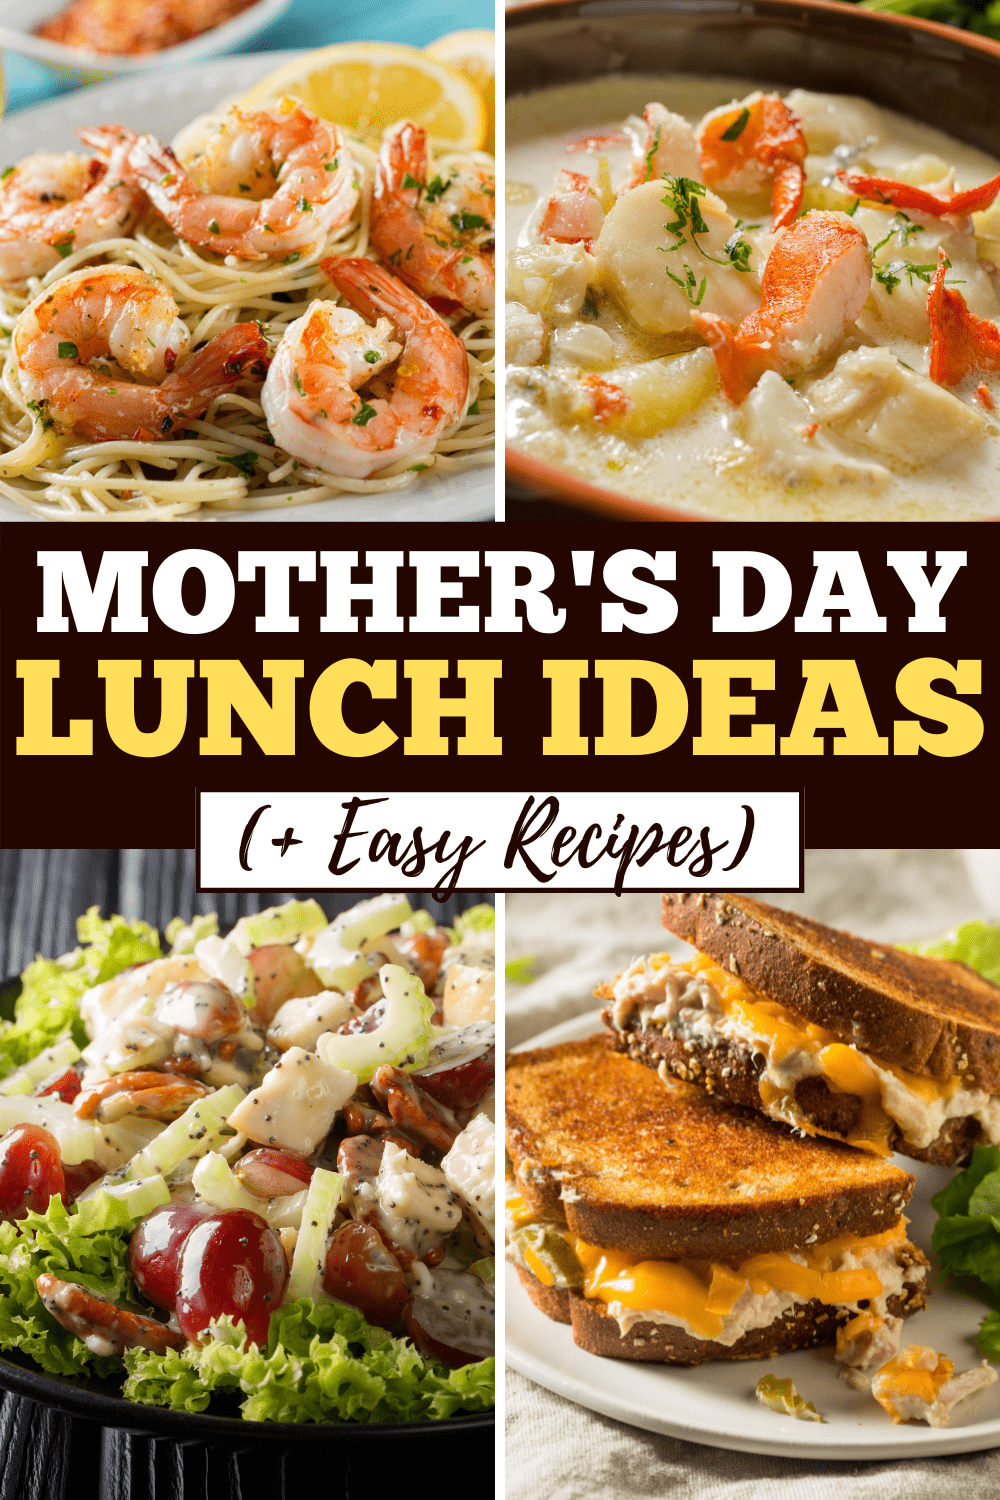 30 Mother’s Day Lunch Ideas (+ Easy Recipes) - Insanely Good